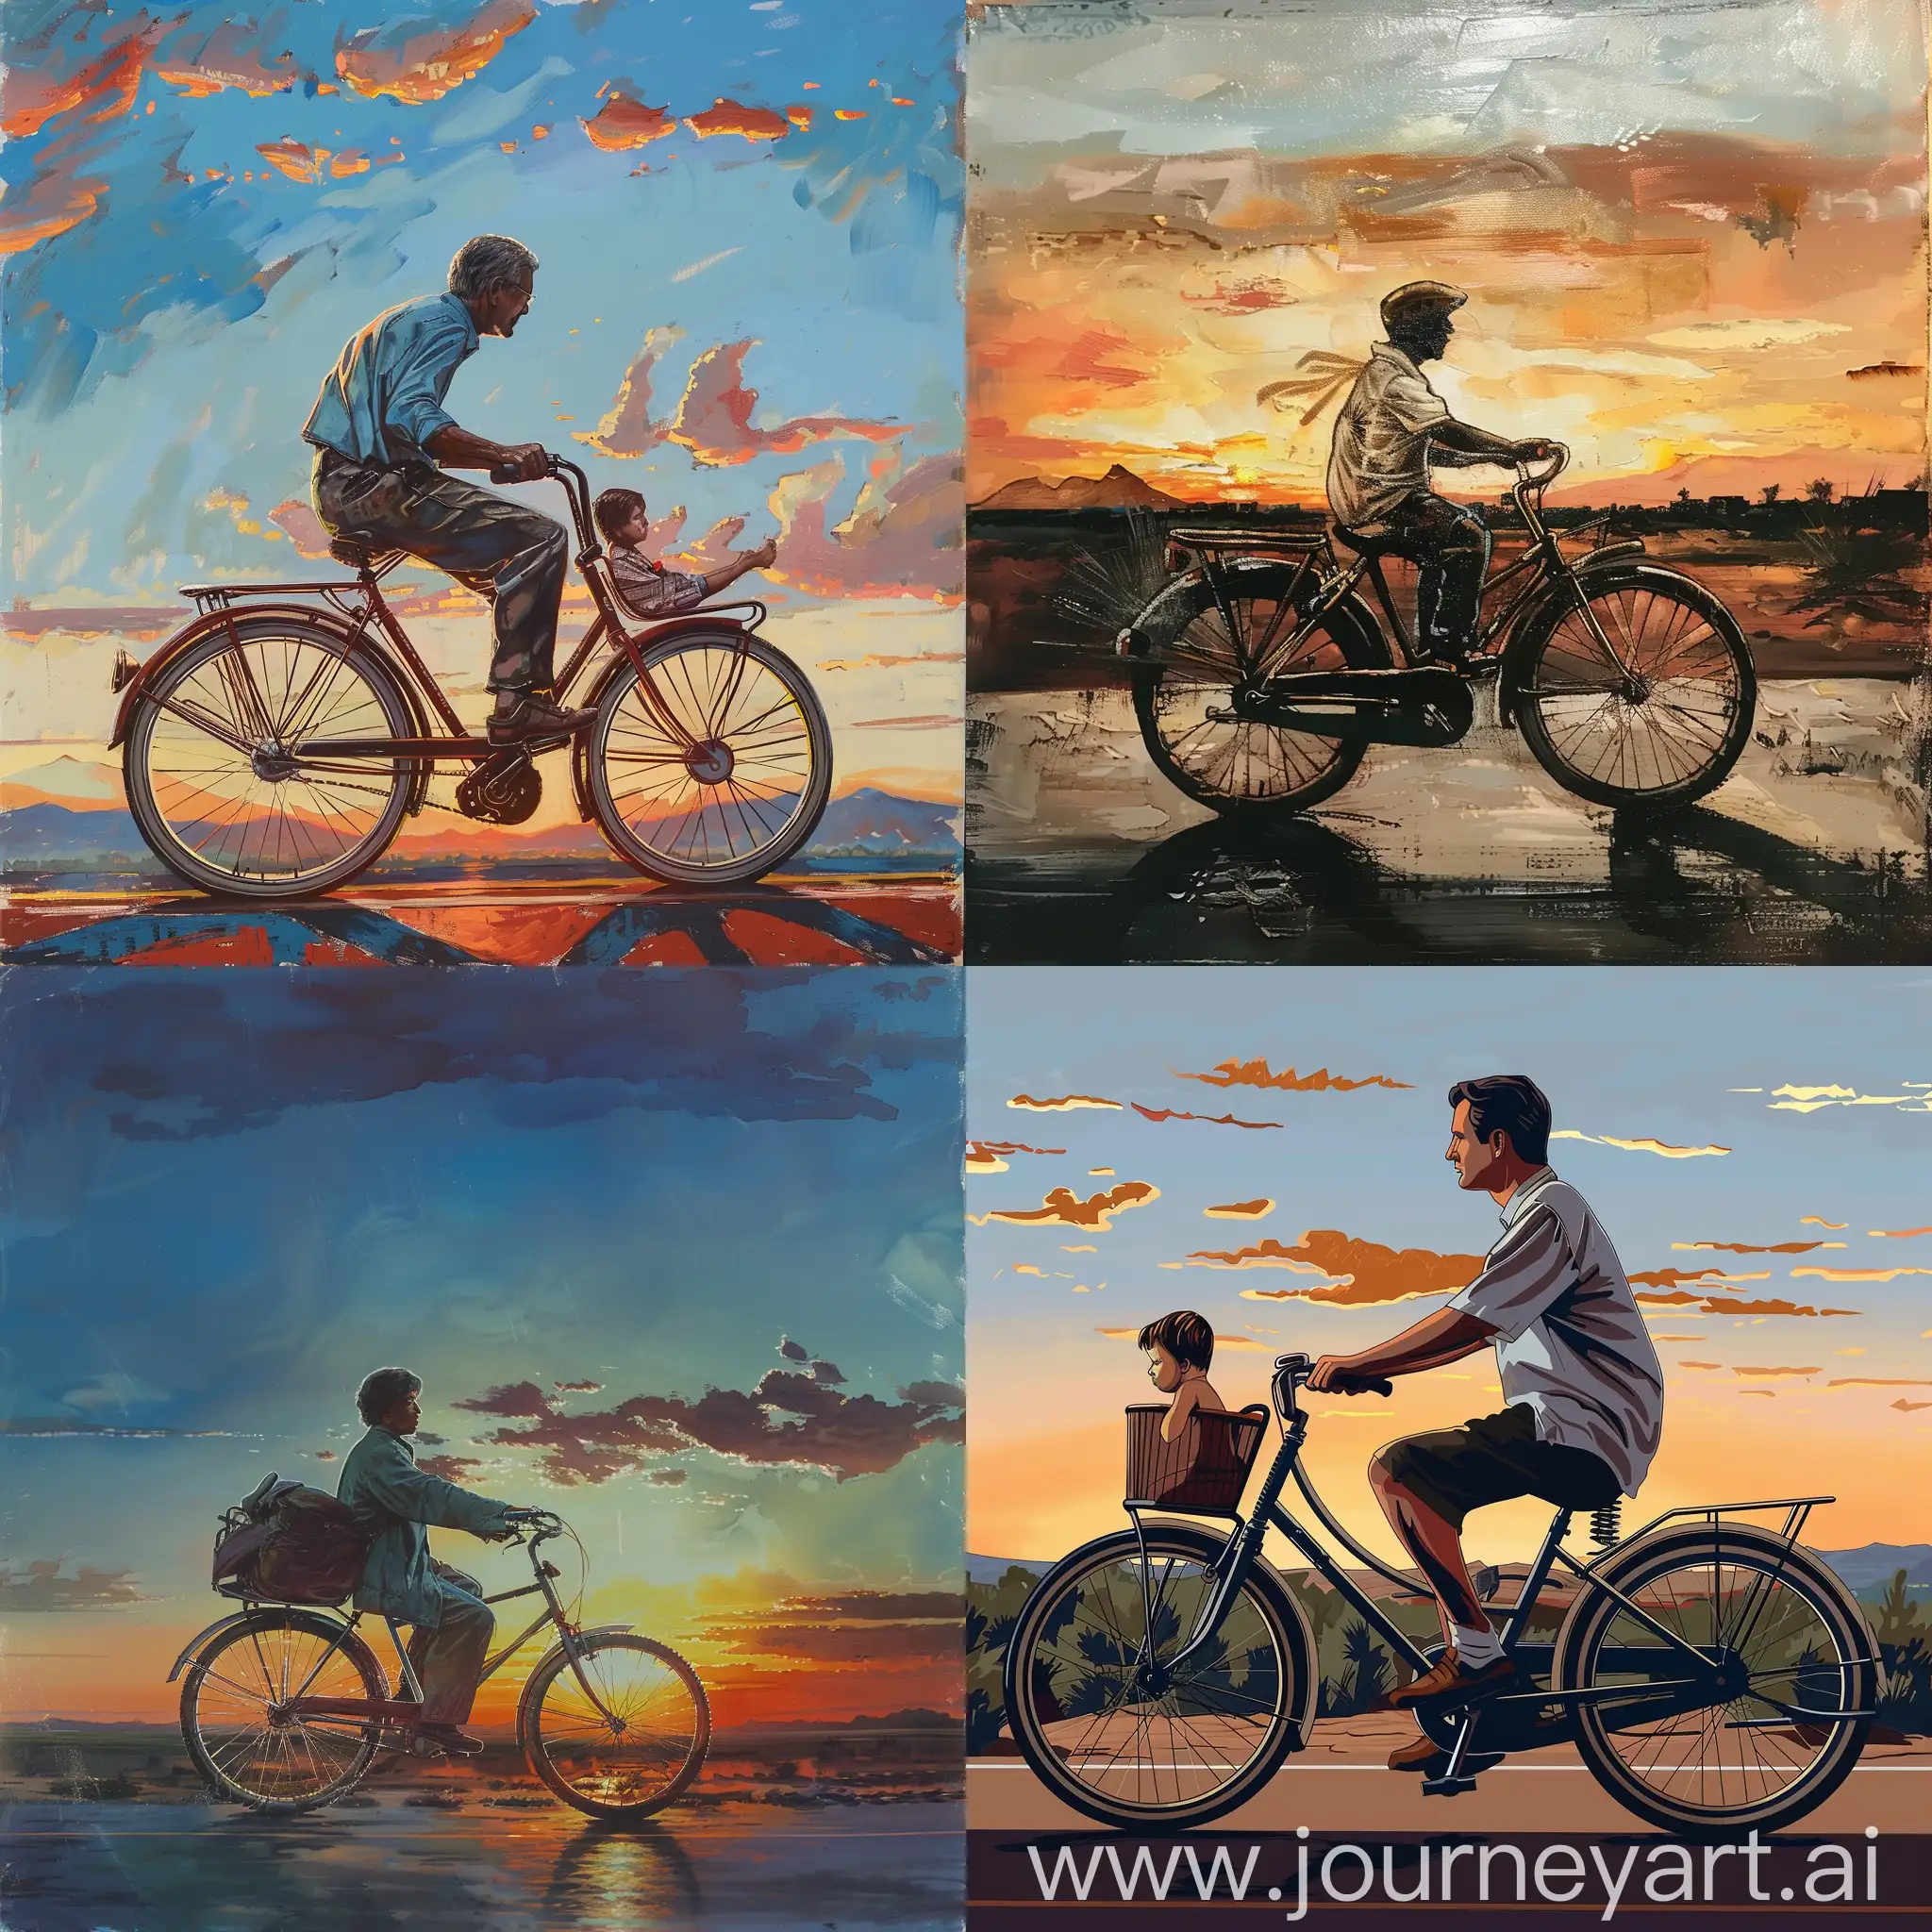 Father-and-Child-Riding-Phoenix-Brand-Bicycle-at-Sunset